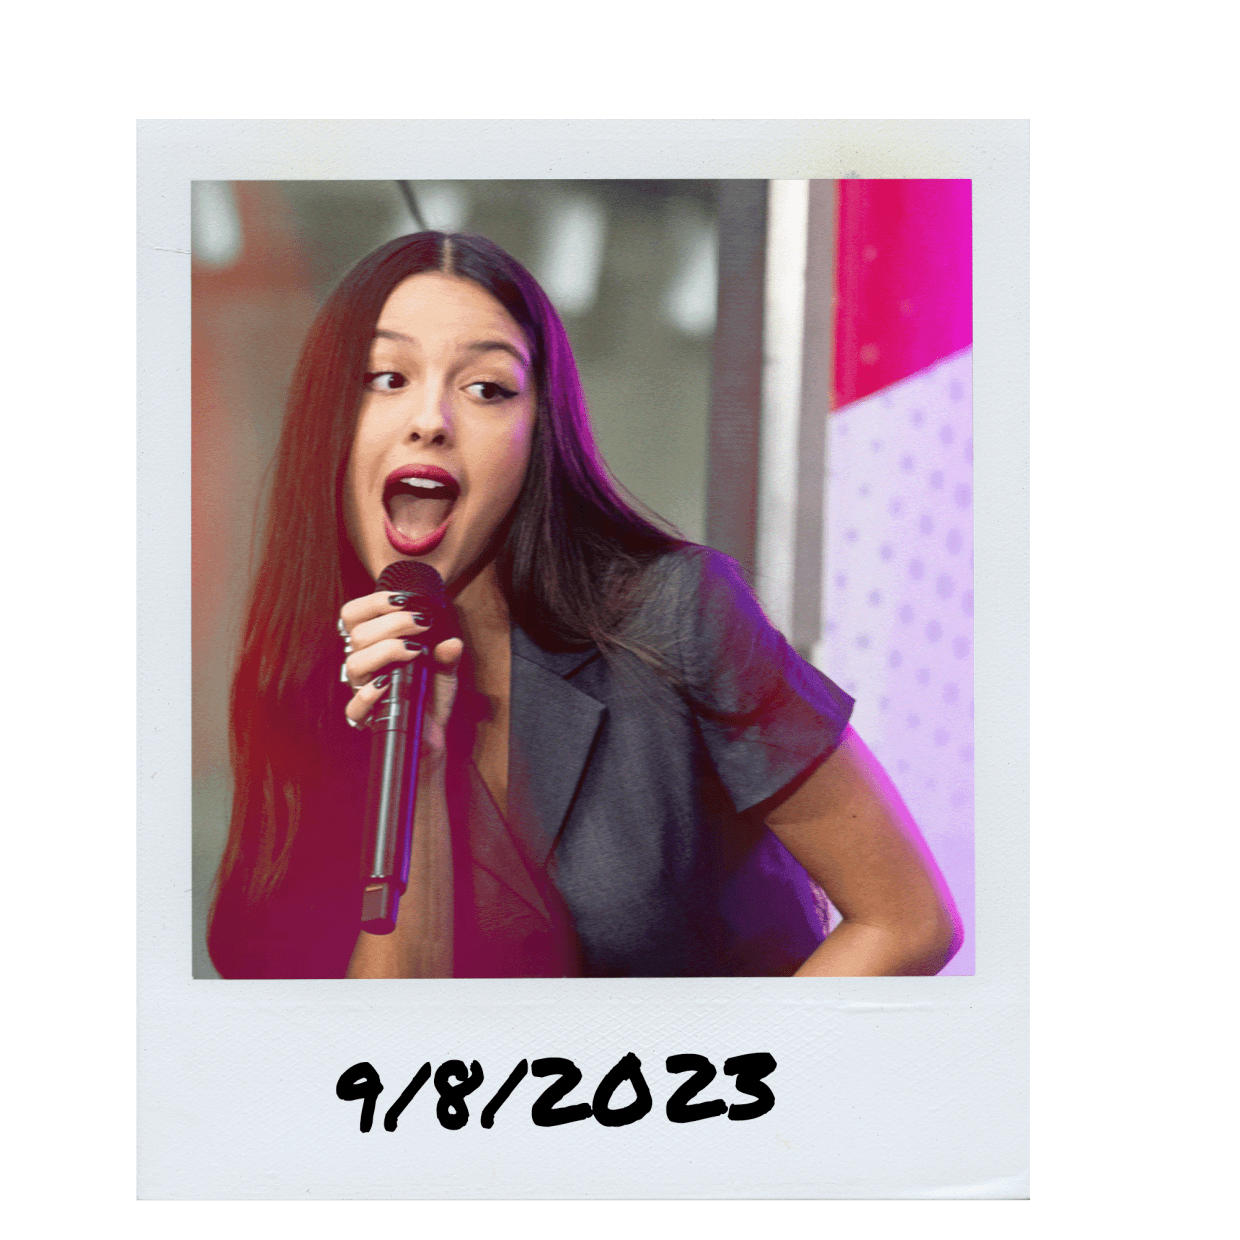 Olivia Rodrigo Performs Songs From New Album Guts on TODAY Show